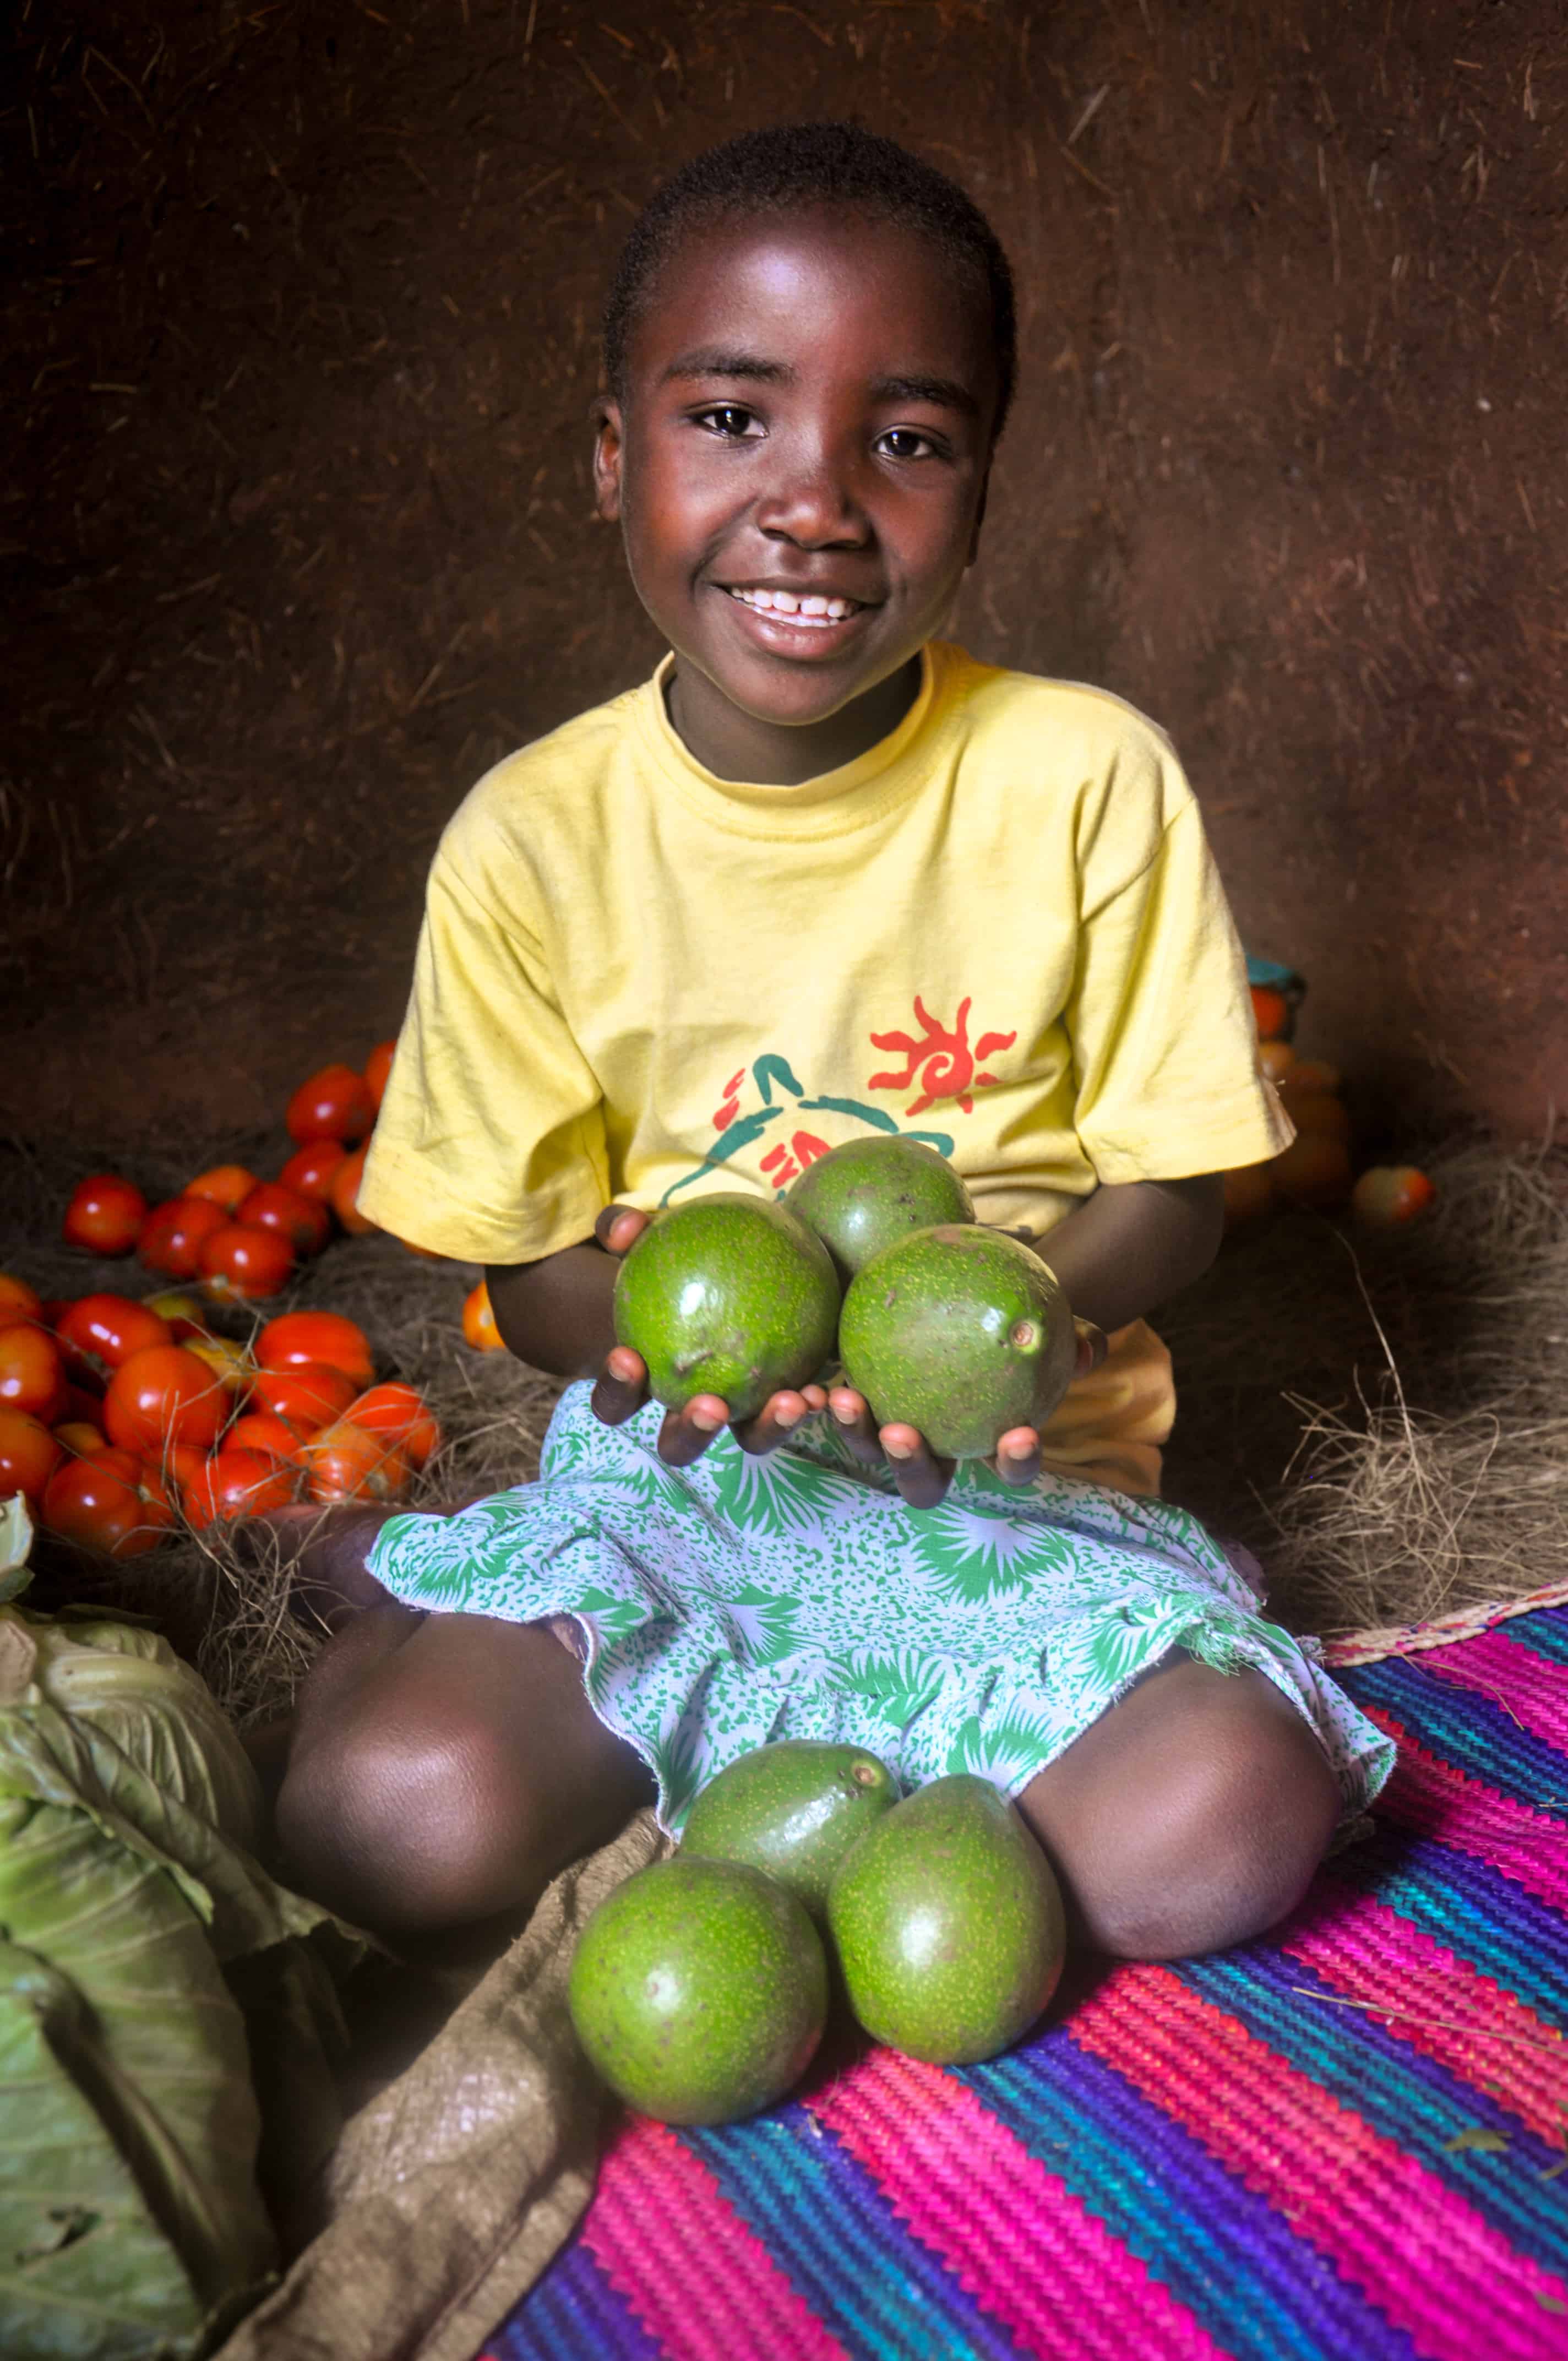 A World Vision Tanzania sponsored child Vanessa (6) happily holding avocadoes which shows food security at her home in Kitoko village located in north western Tanzania